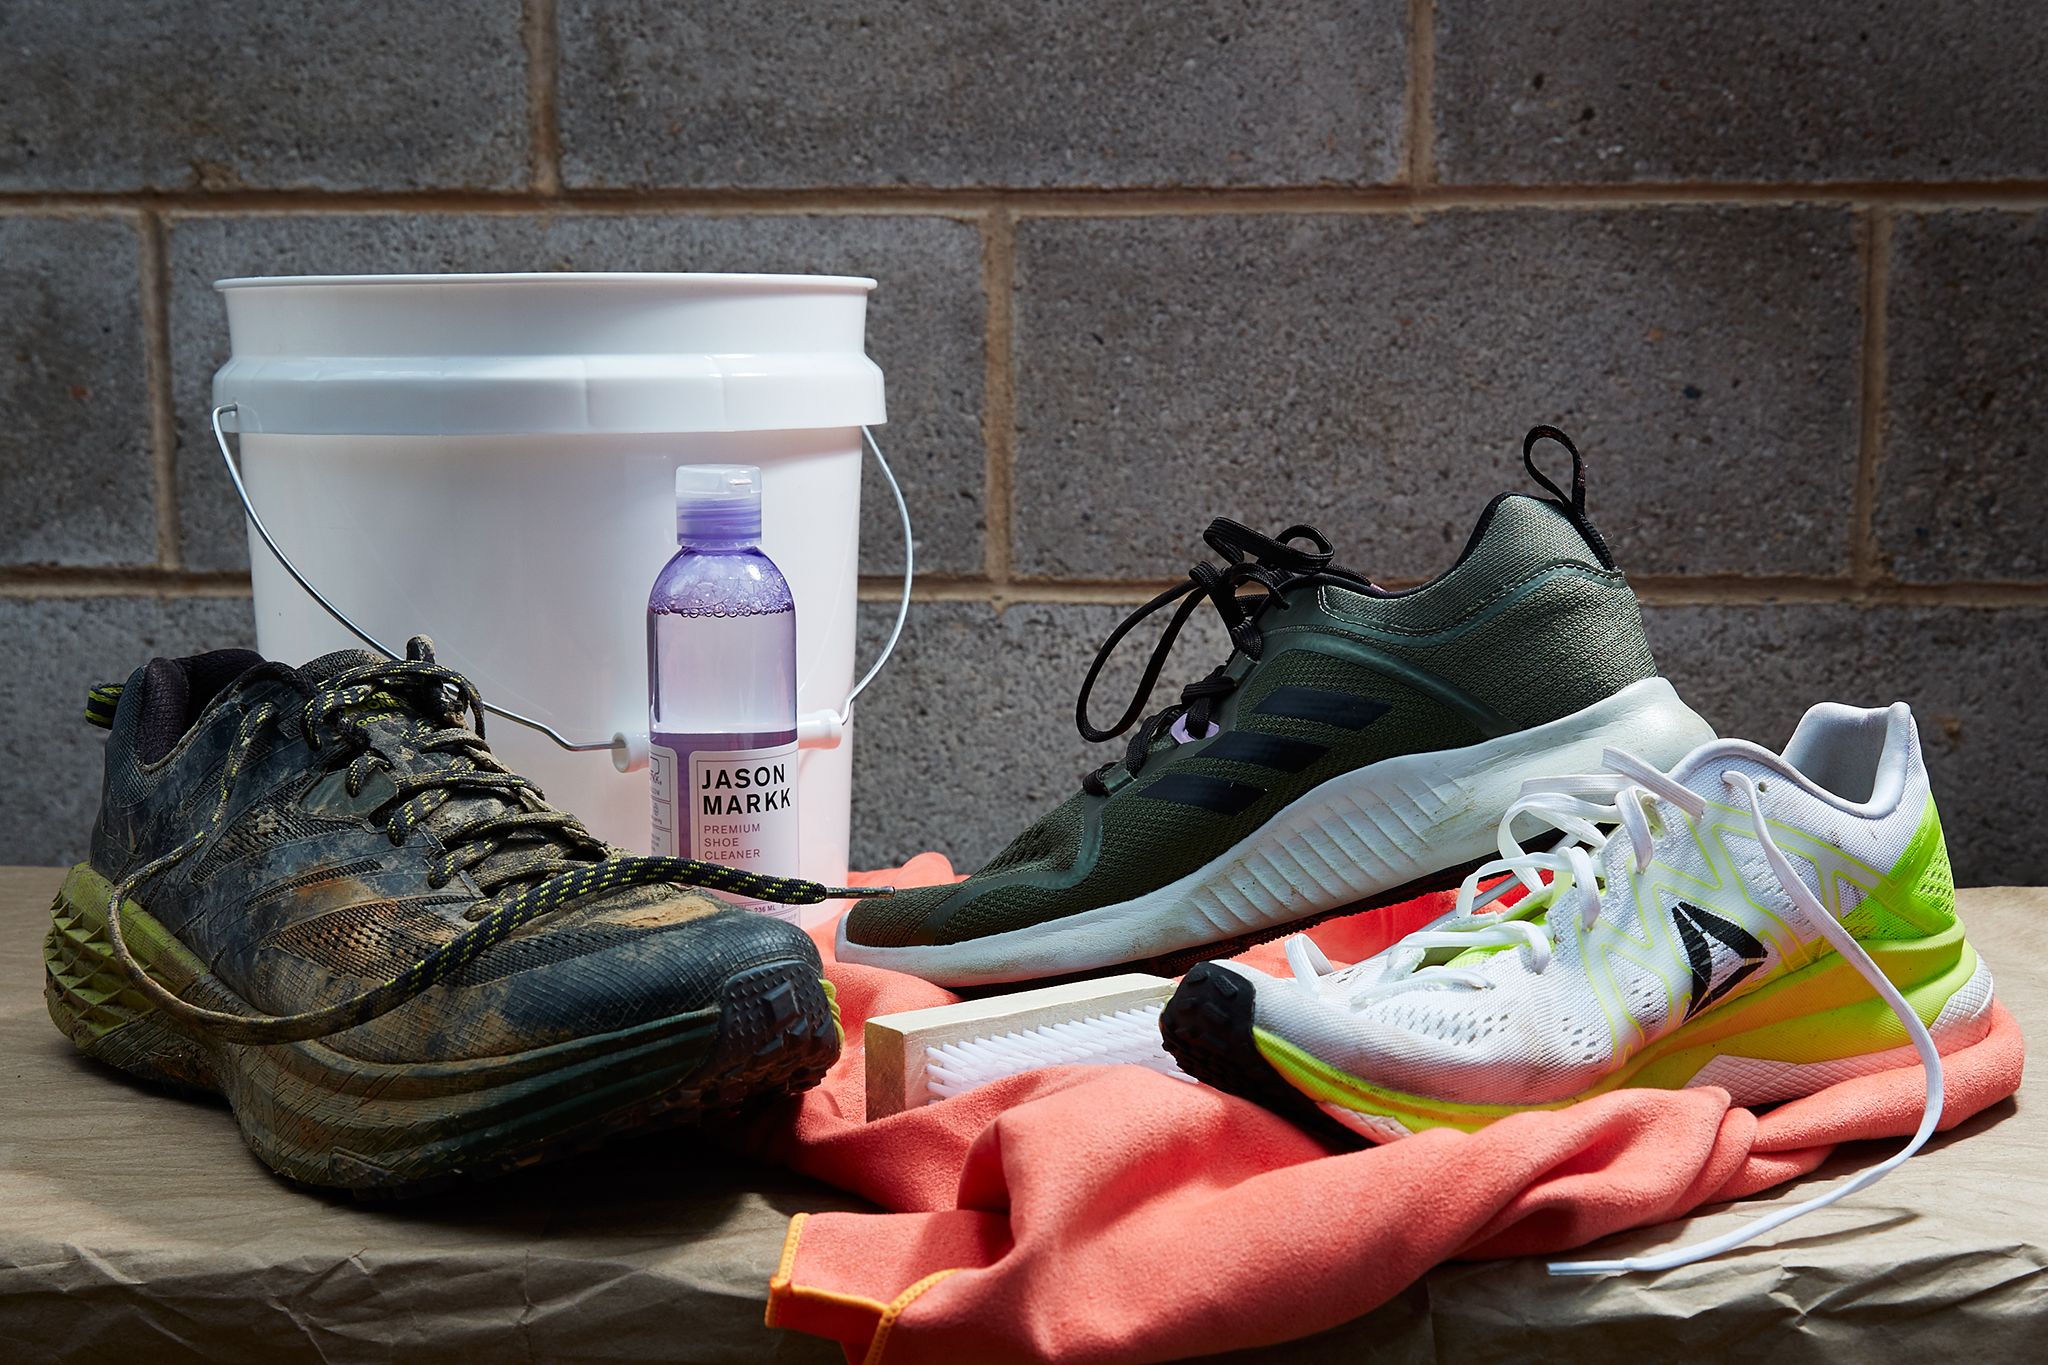 How to Clean Shoes - Can You Put Shoes in the Washing Machine or Dryer?